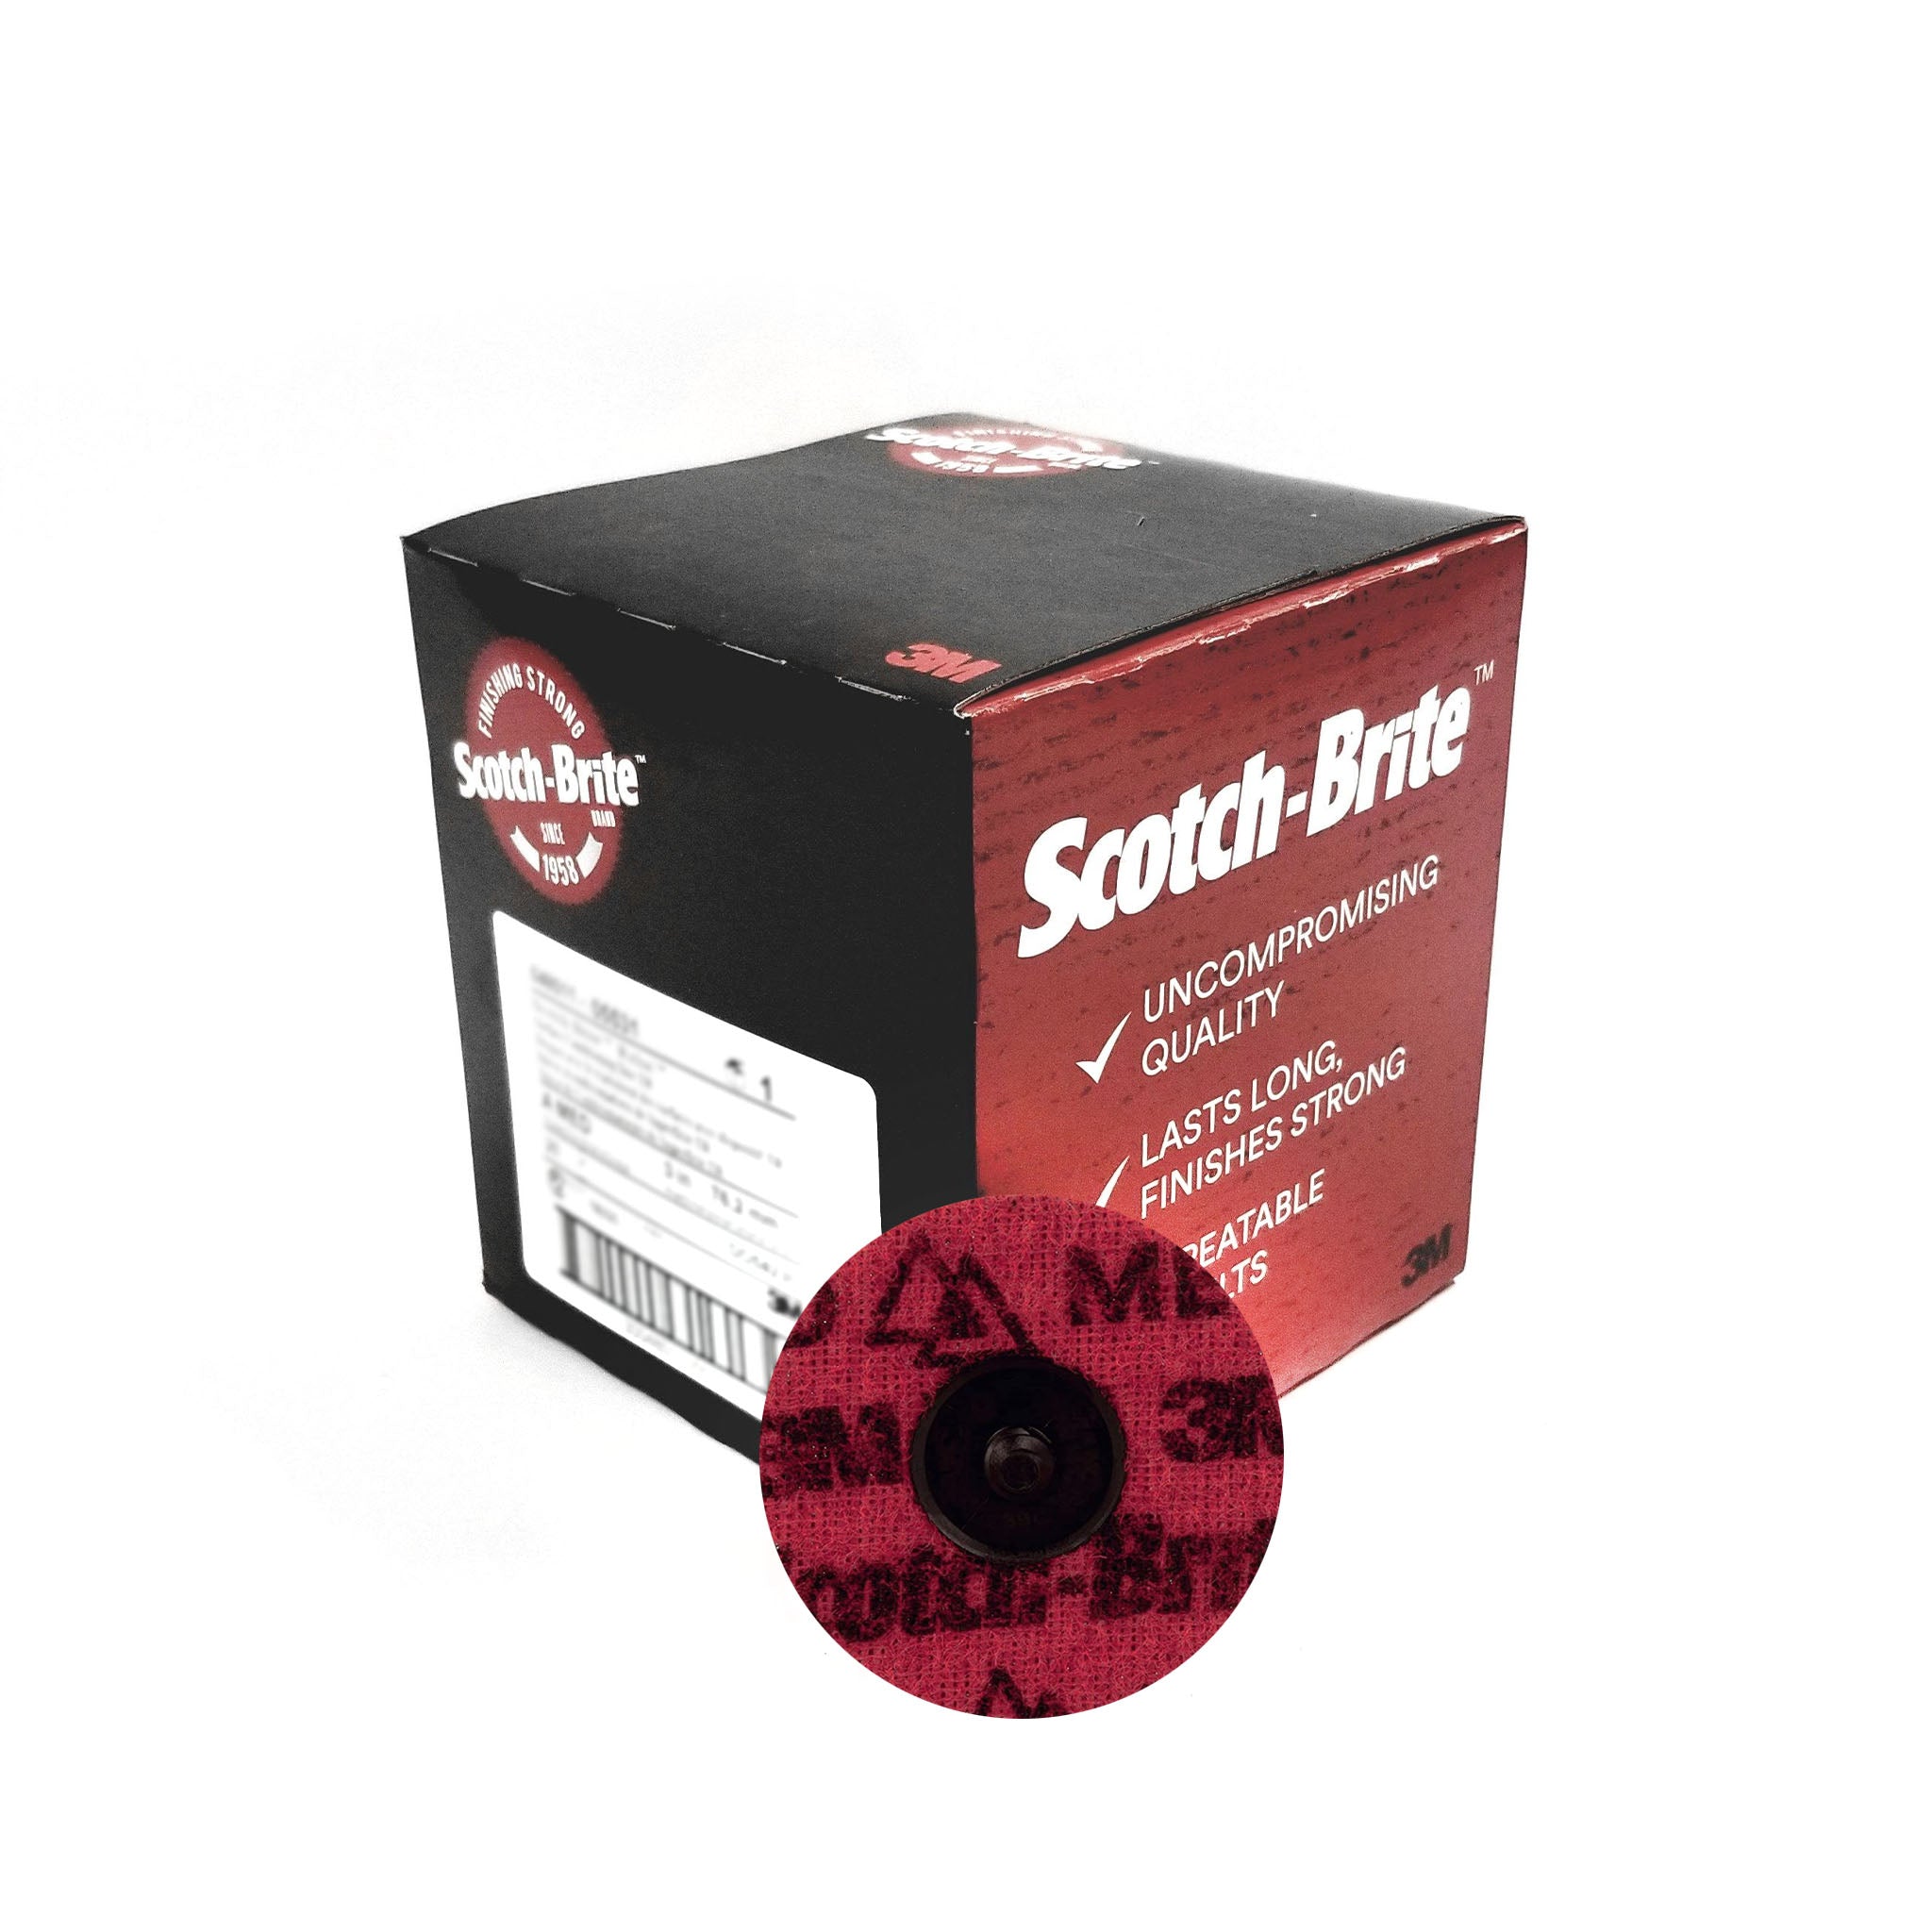 Scotch-Brite Roloc Surface Conditioning Disc, Maroon, Medium, TR, 2 in, 25 per box. 4 Boxes, 3M Part Number 07486